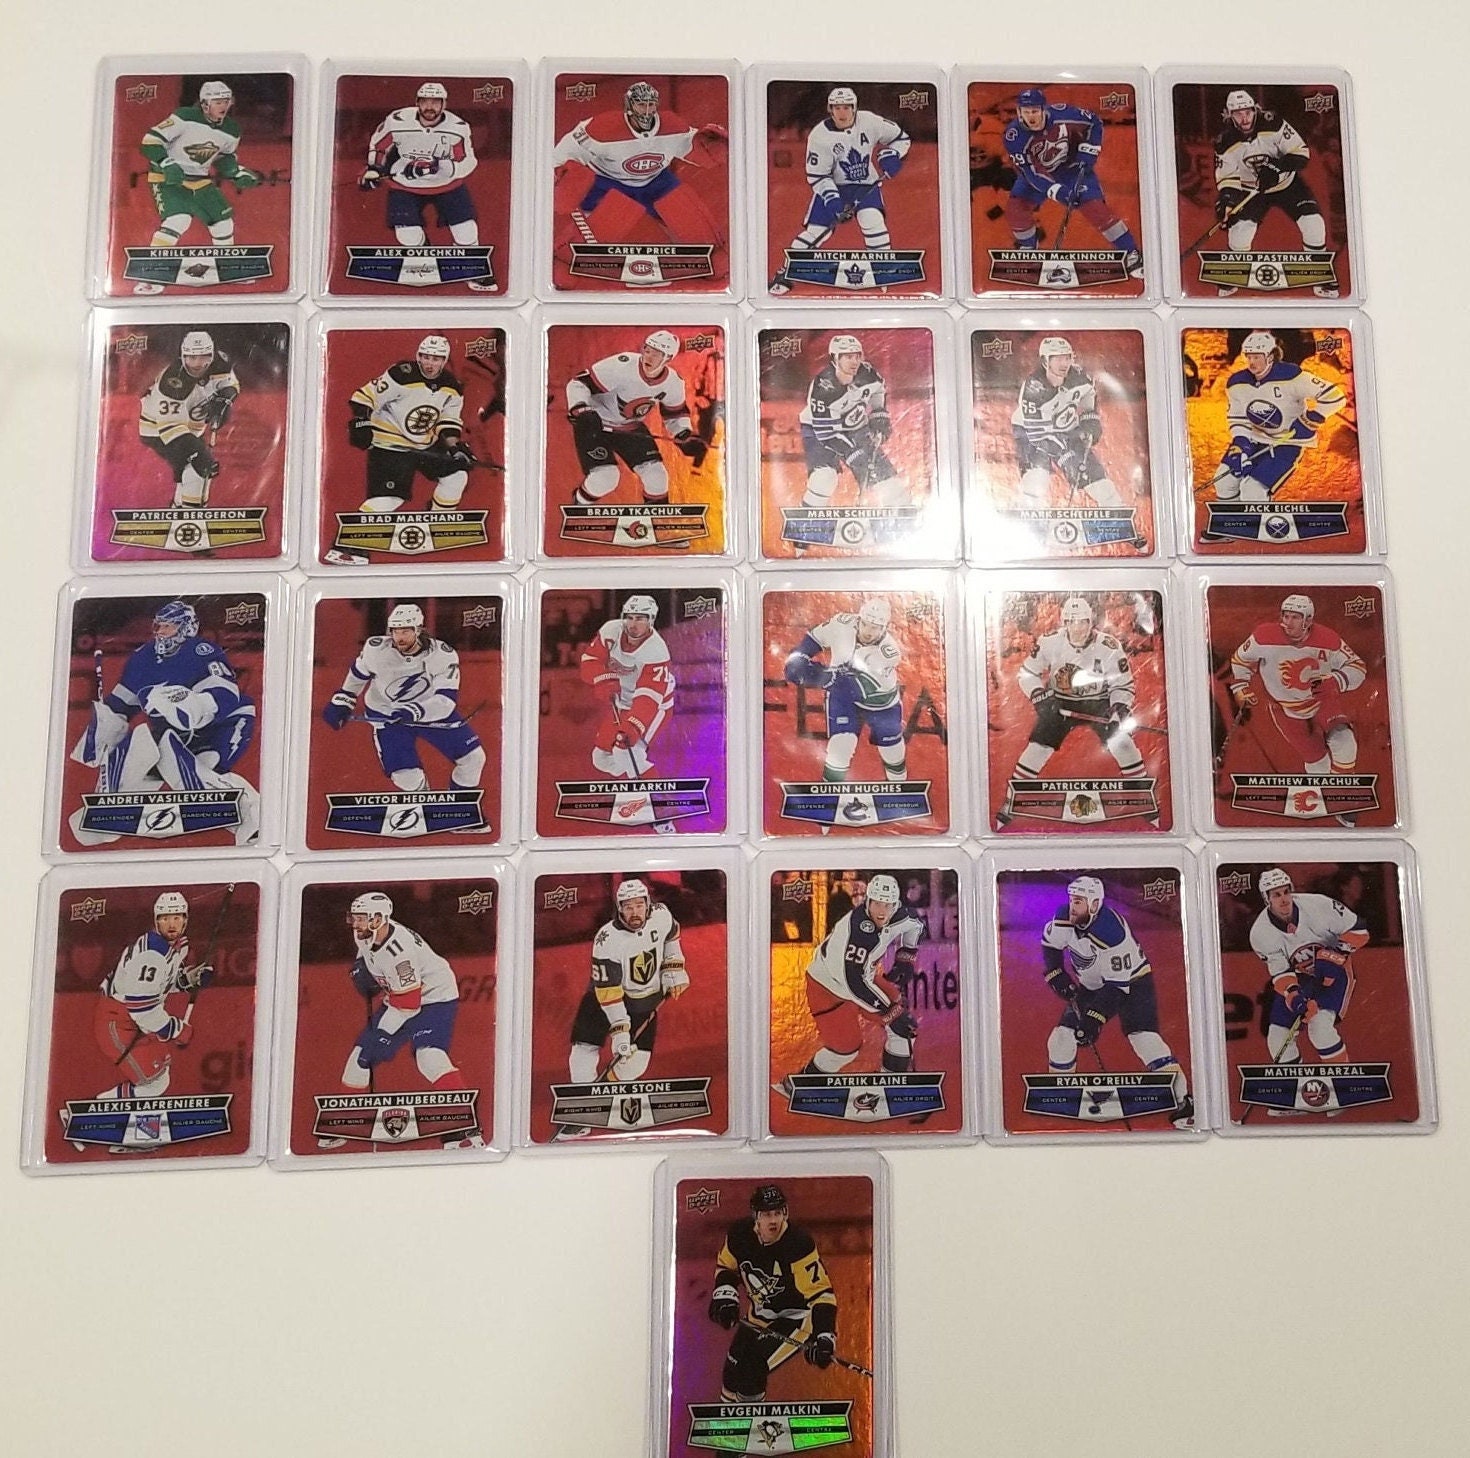 Tim Hortons Hockey Cards Arrive for Another Season